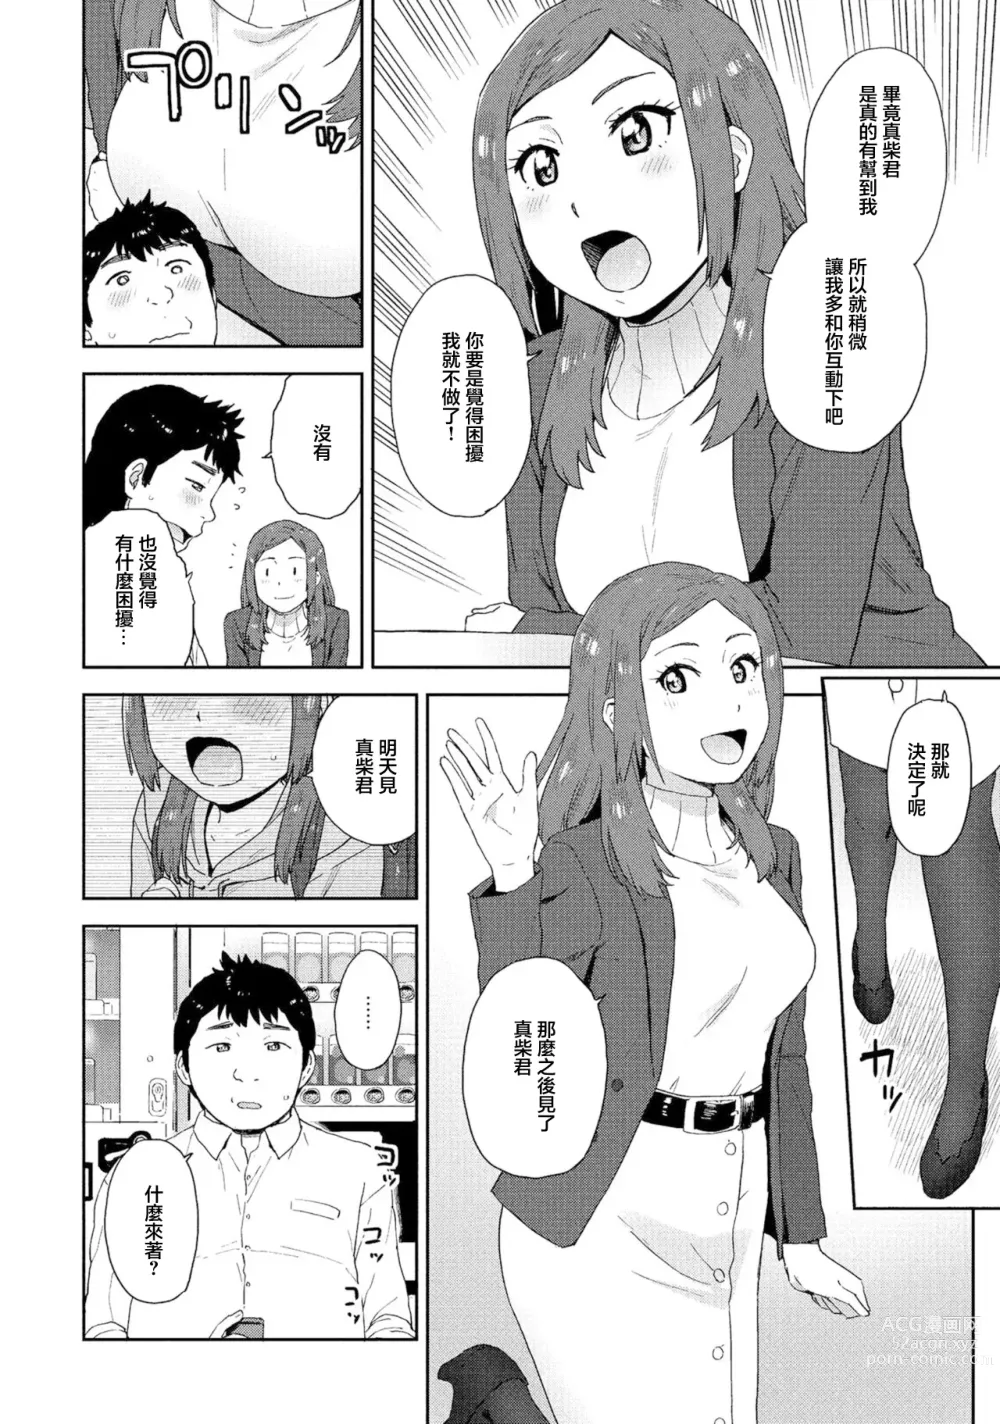 Page 6 of doujinshi 可靠依賴性